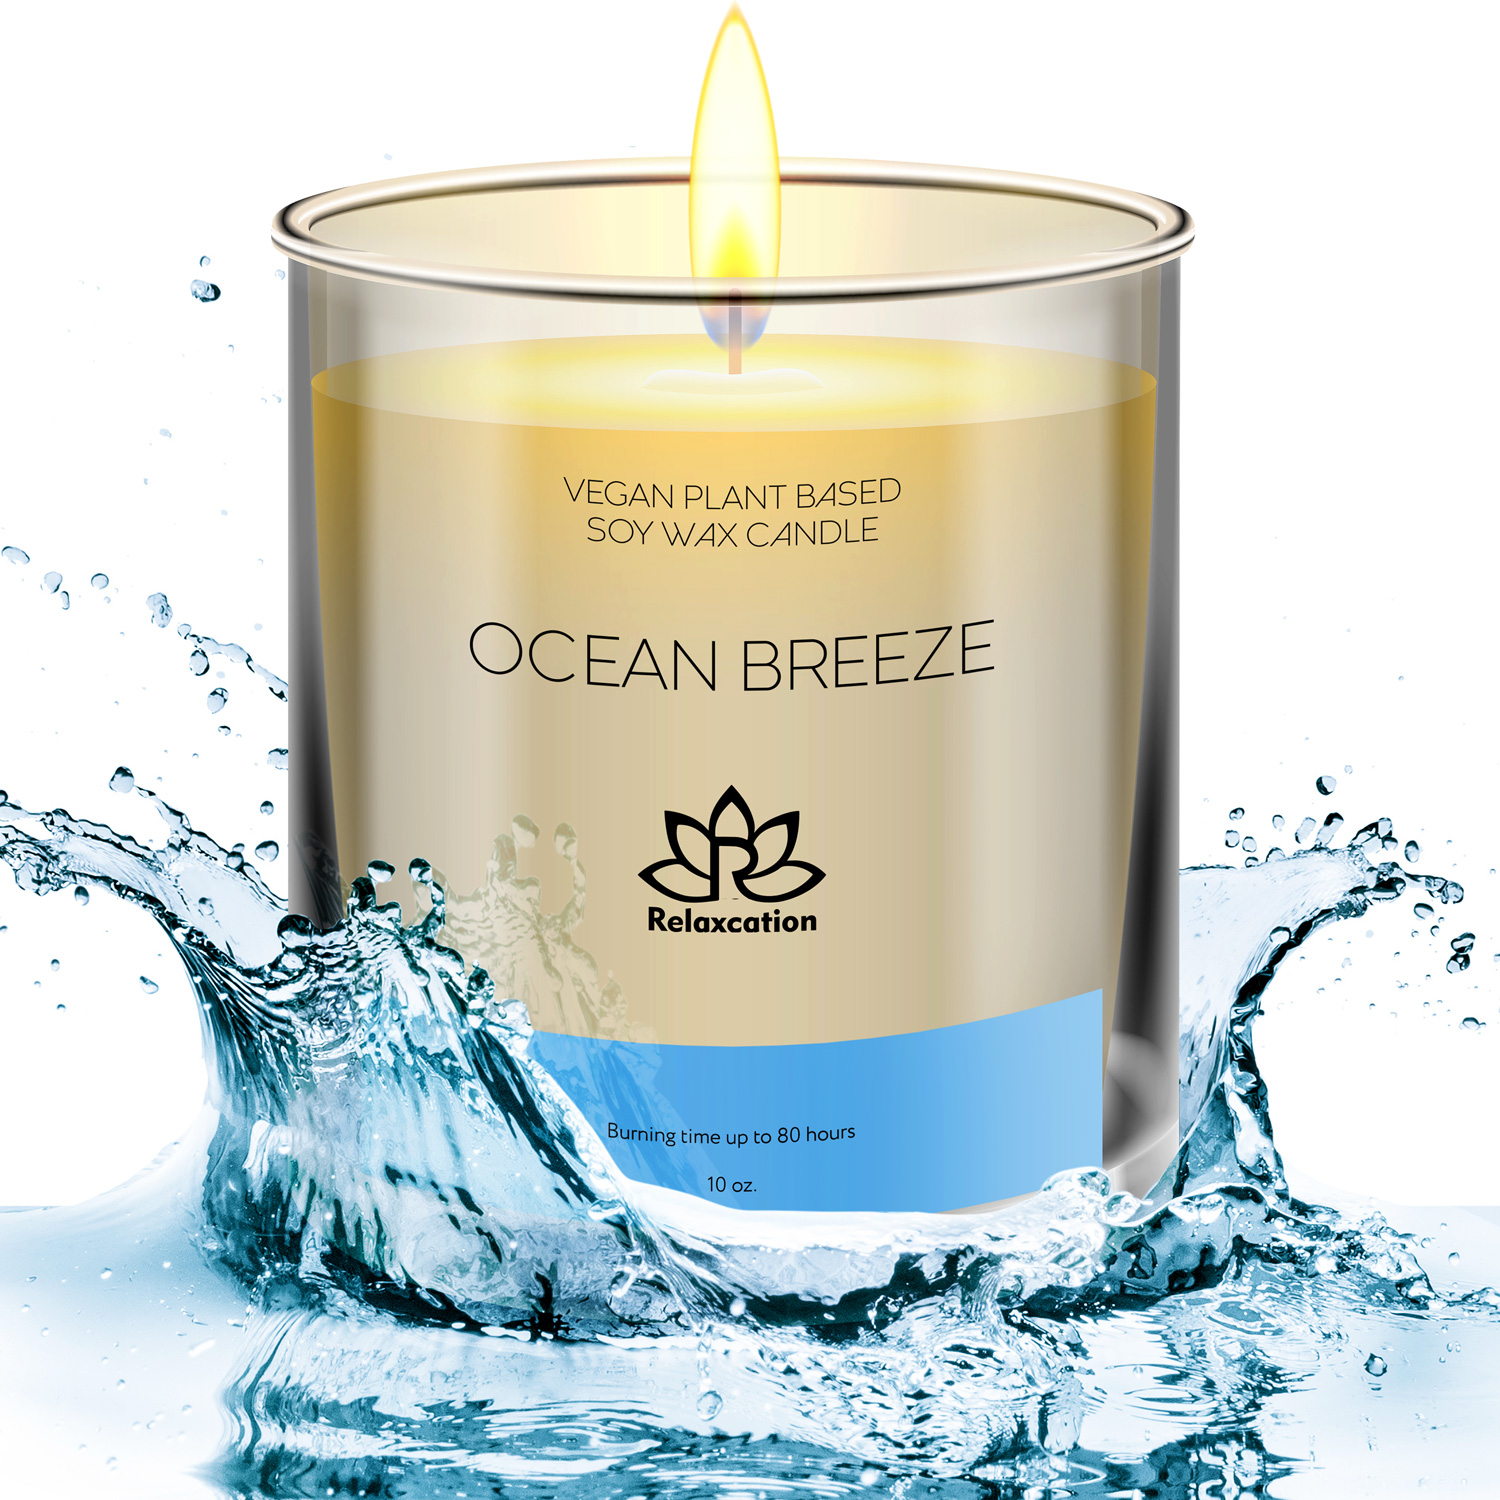 Ocean Breeze Soy Wax Candle in Glass Jar Clean Burn up